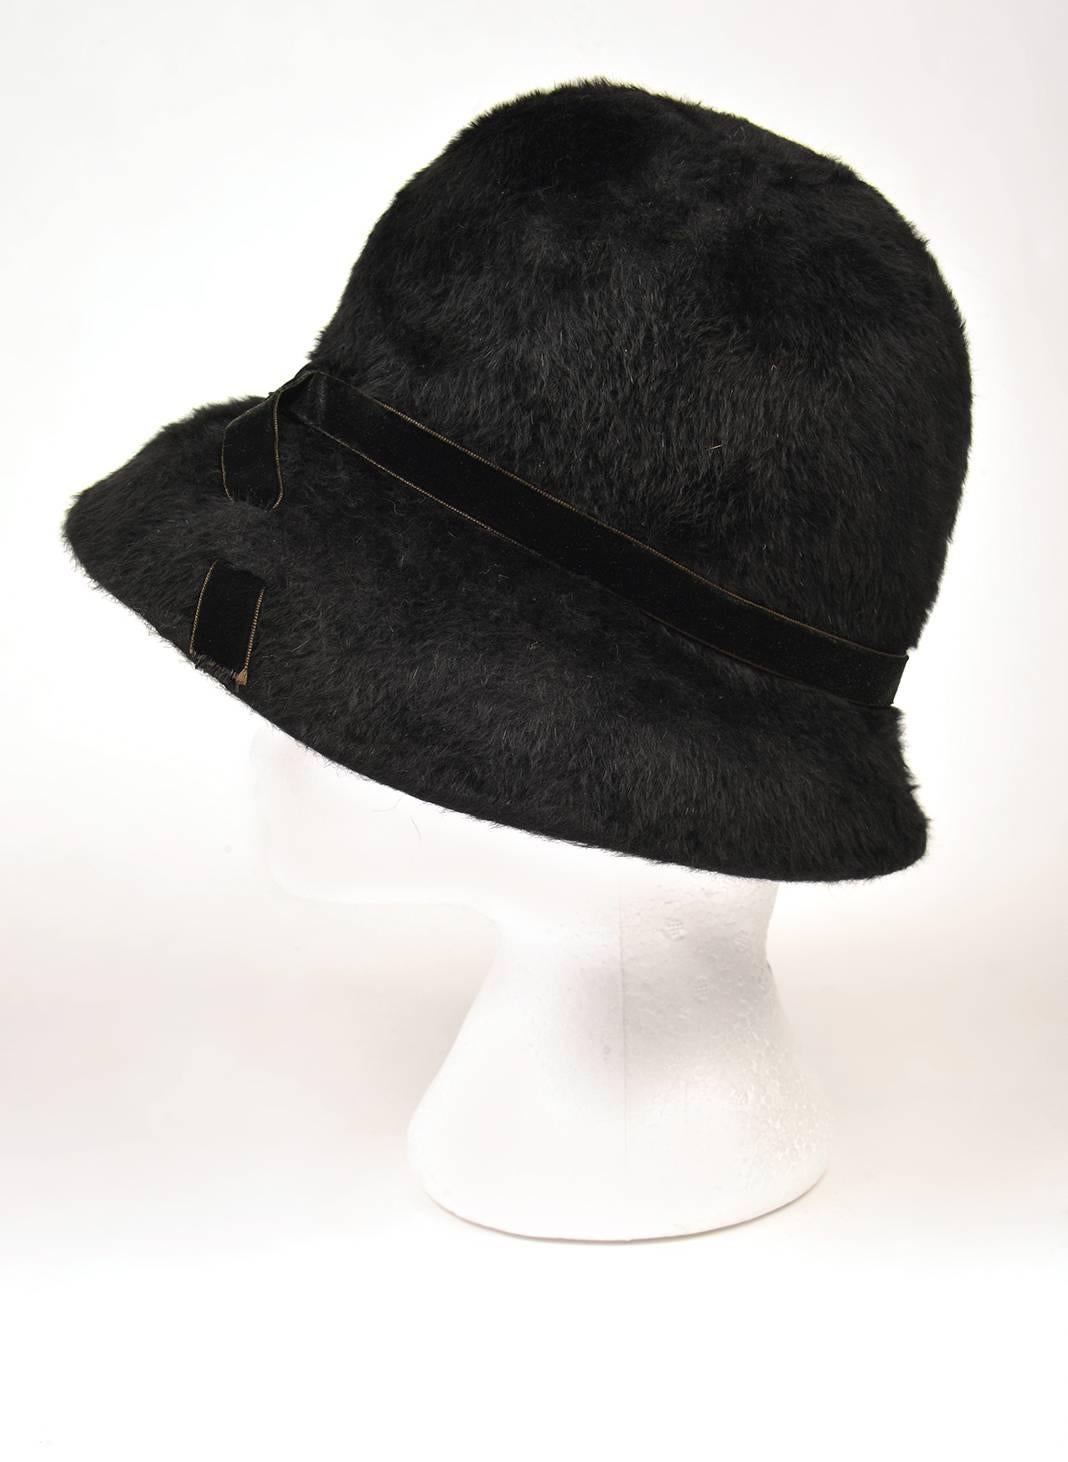 So Now!  Looks like it just walked off the Marc Jacobs runway show at New York Fashion Week.

This fantastic, wide-brimmed, soft and sumptuous faux fur cloche hat by Mr. John - Matador features an elegant velvet ribbon band that crosses over in the